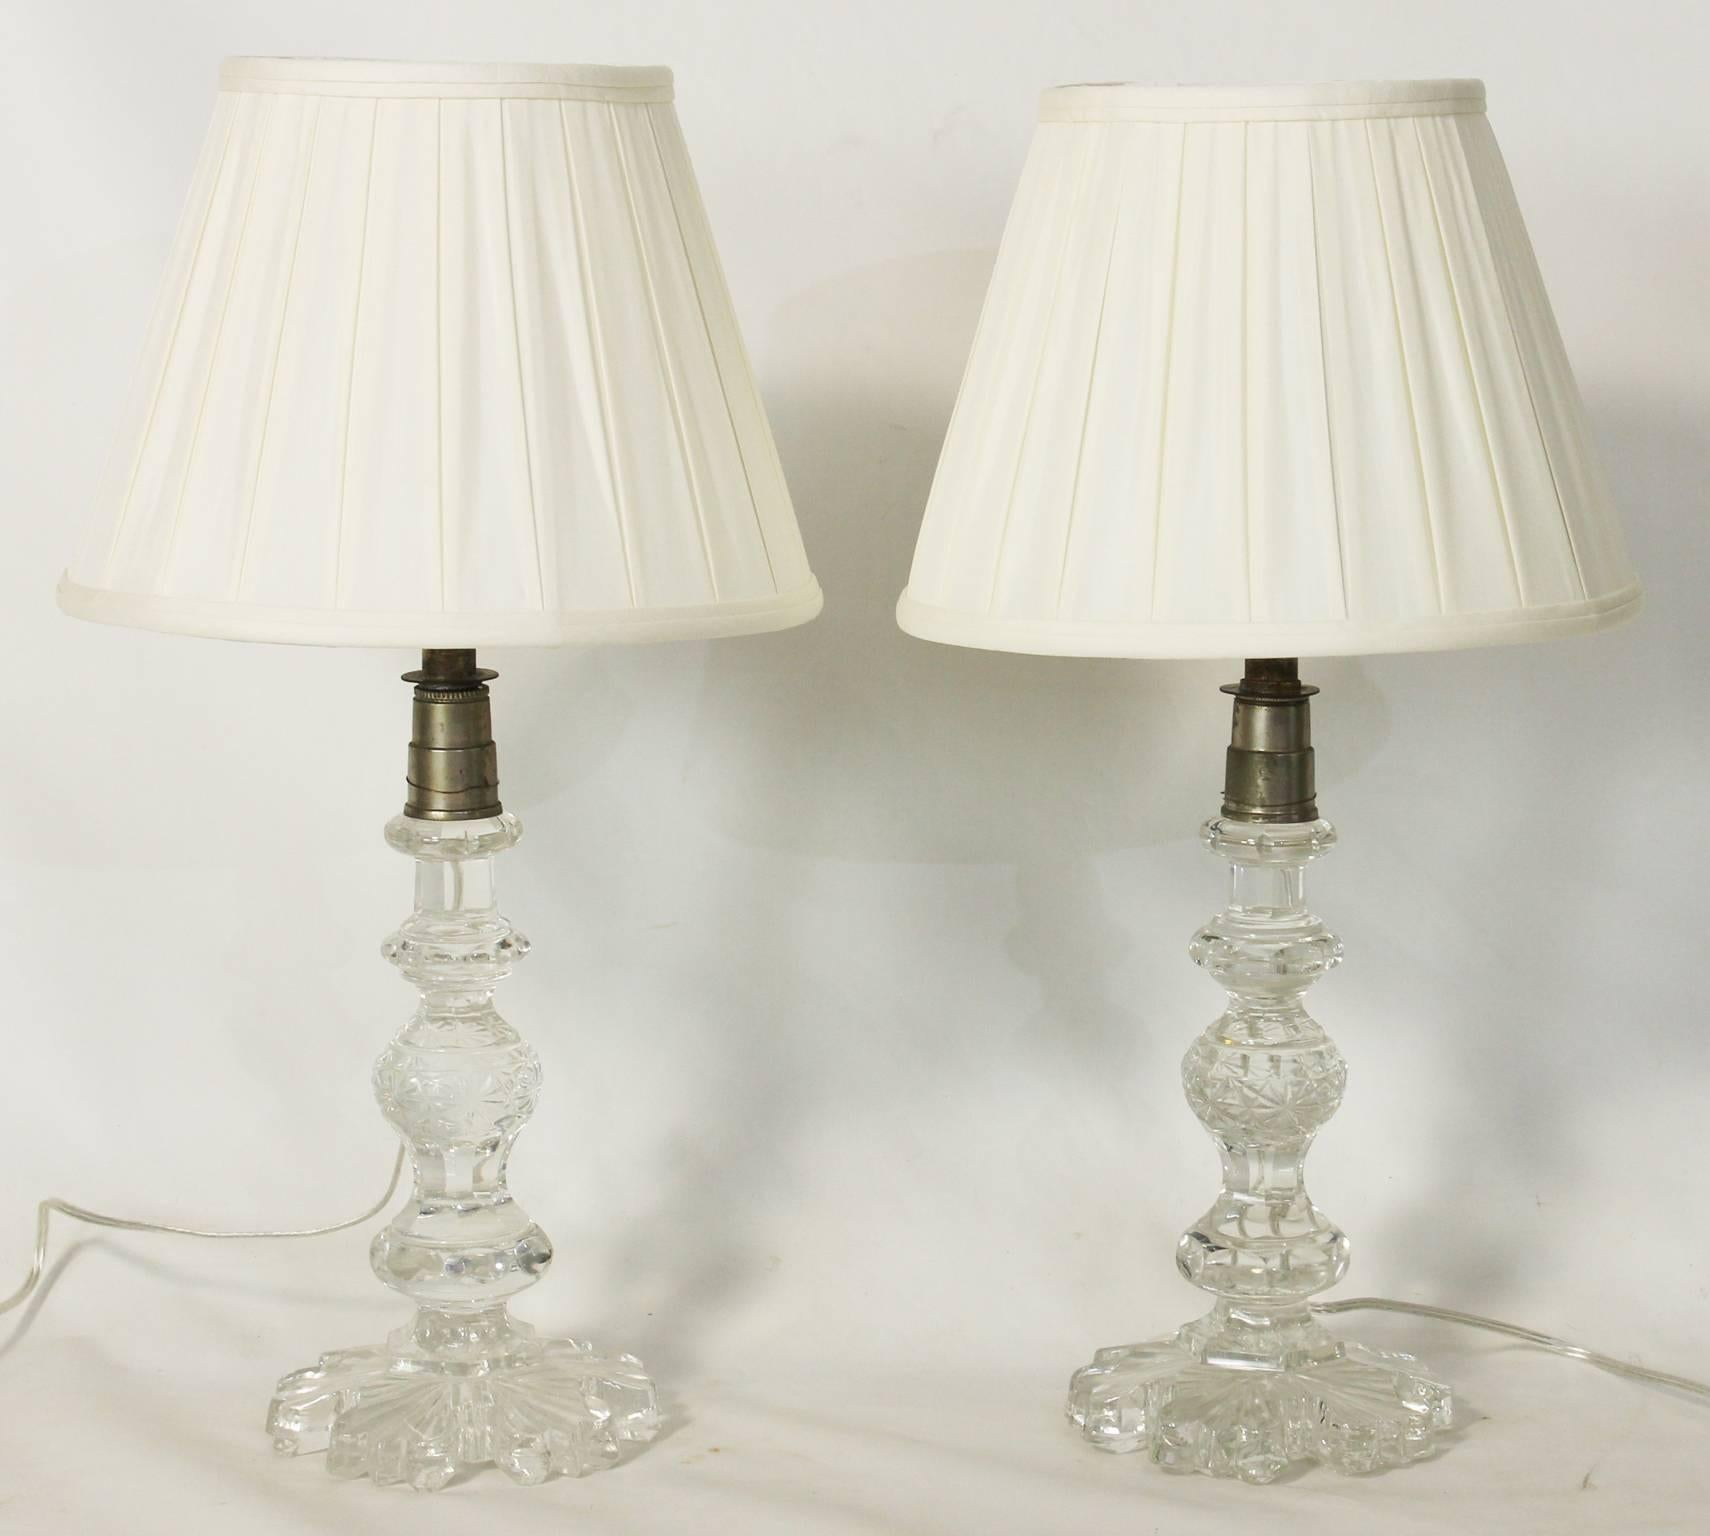 A large and lovely pair of mid-19th century Anglo Irish candlestick table lamps with silk pleated shades. The lamps have been newly professionally wired.